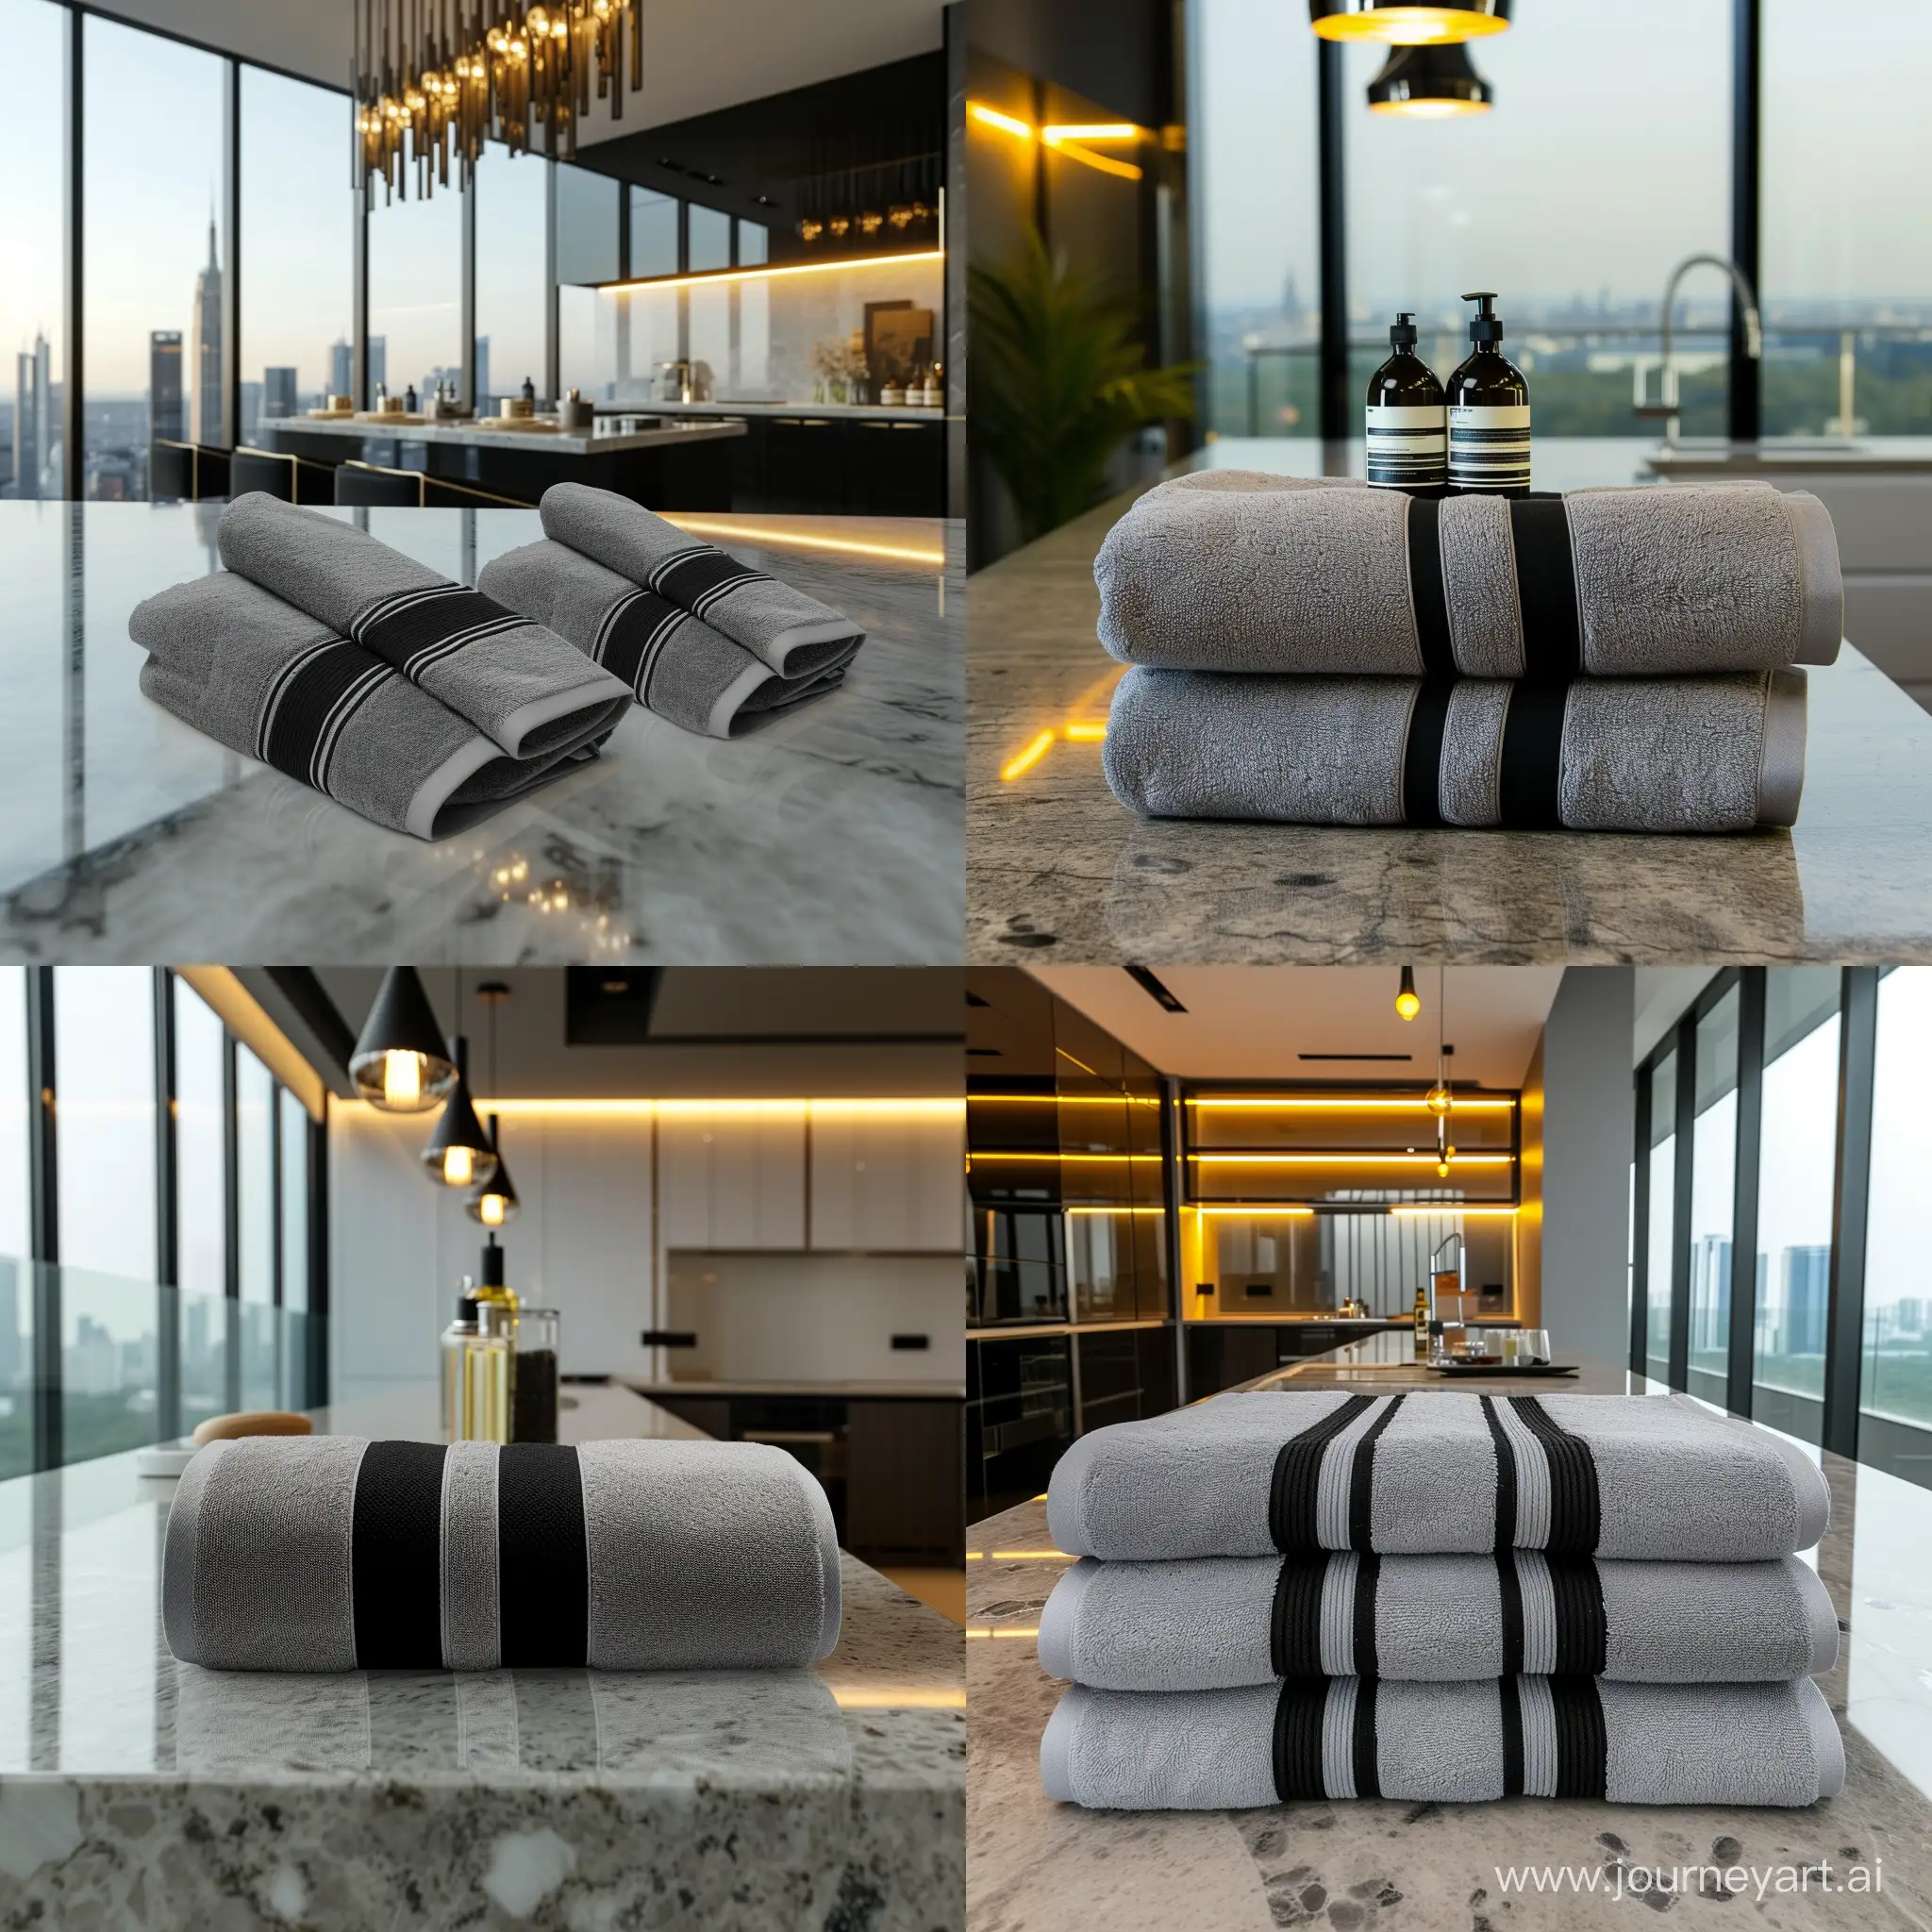 Luxurious-Kitchen-Ambiance-Grey-Bath-Towels-with-Chic-Black-Stripes